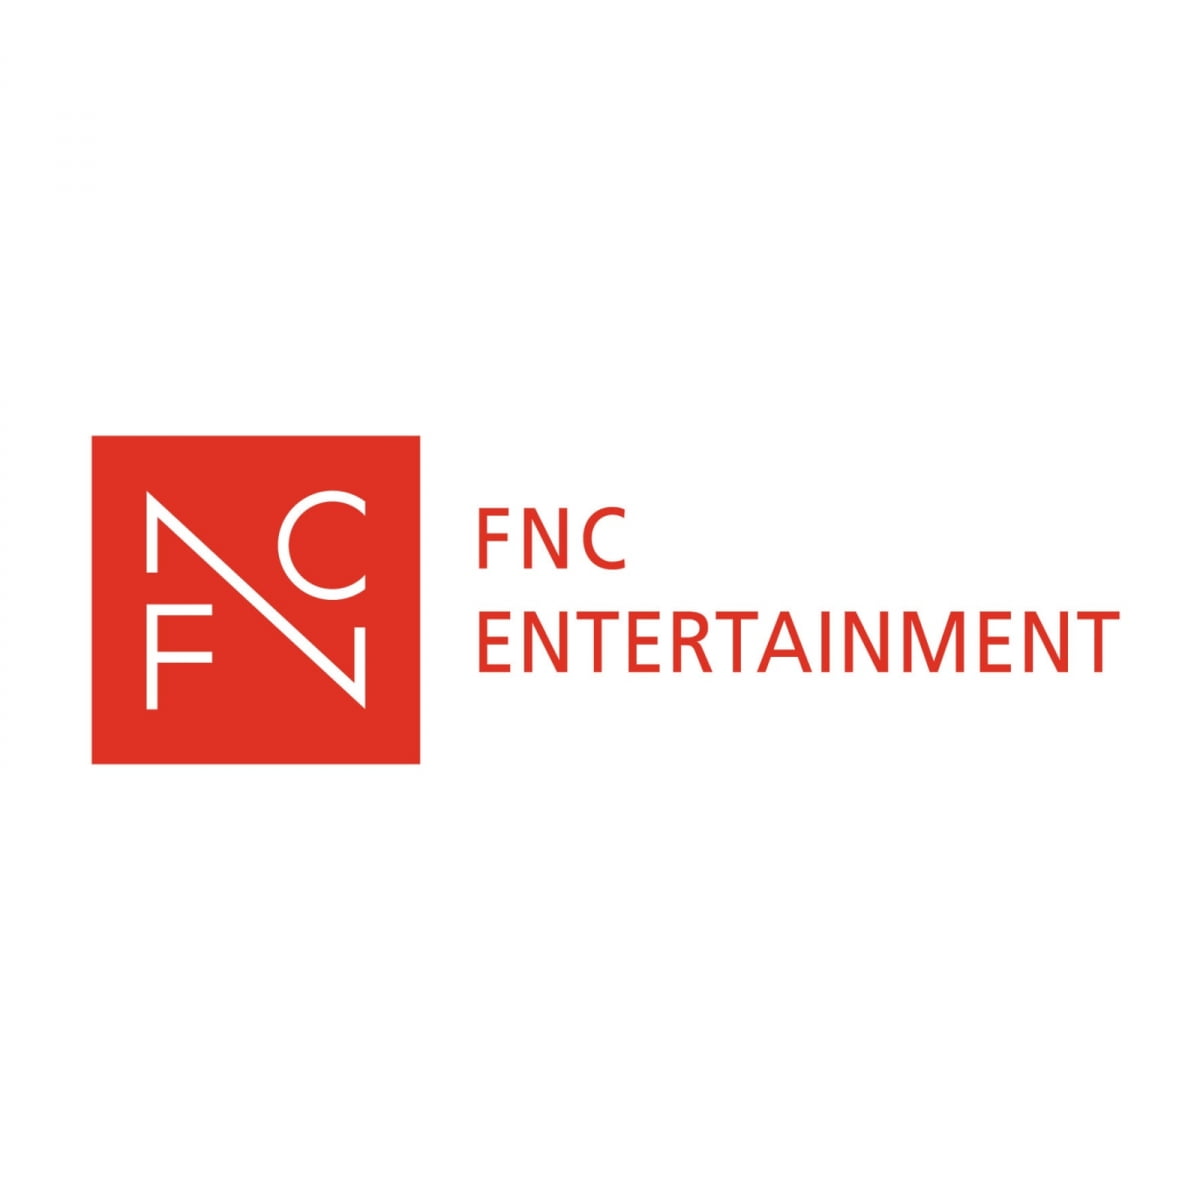 FNC to launch 7-member boy group early next year after 4 years